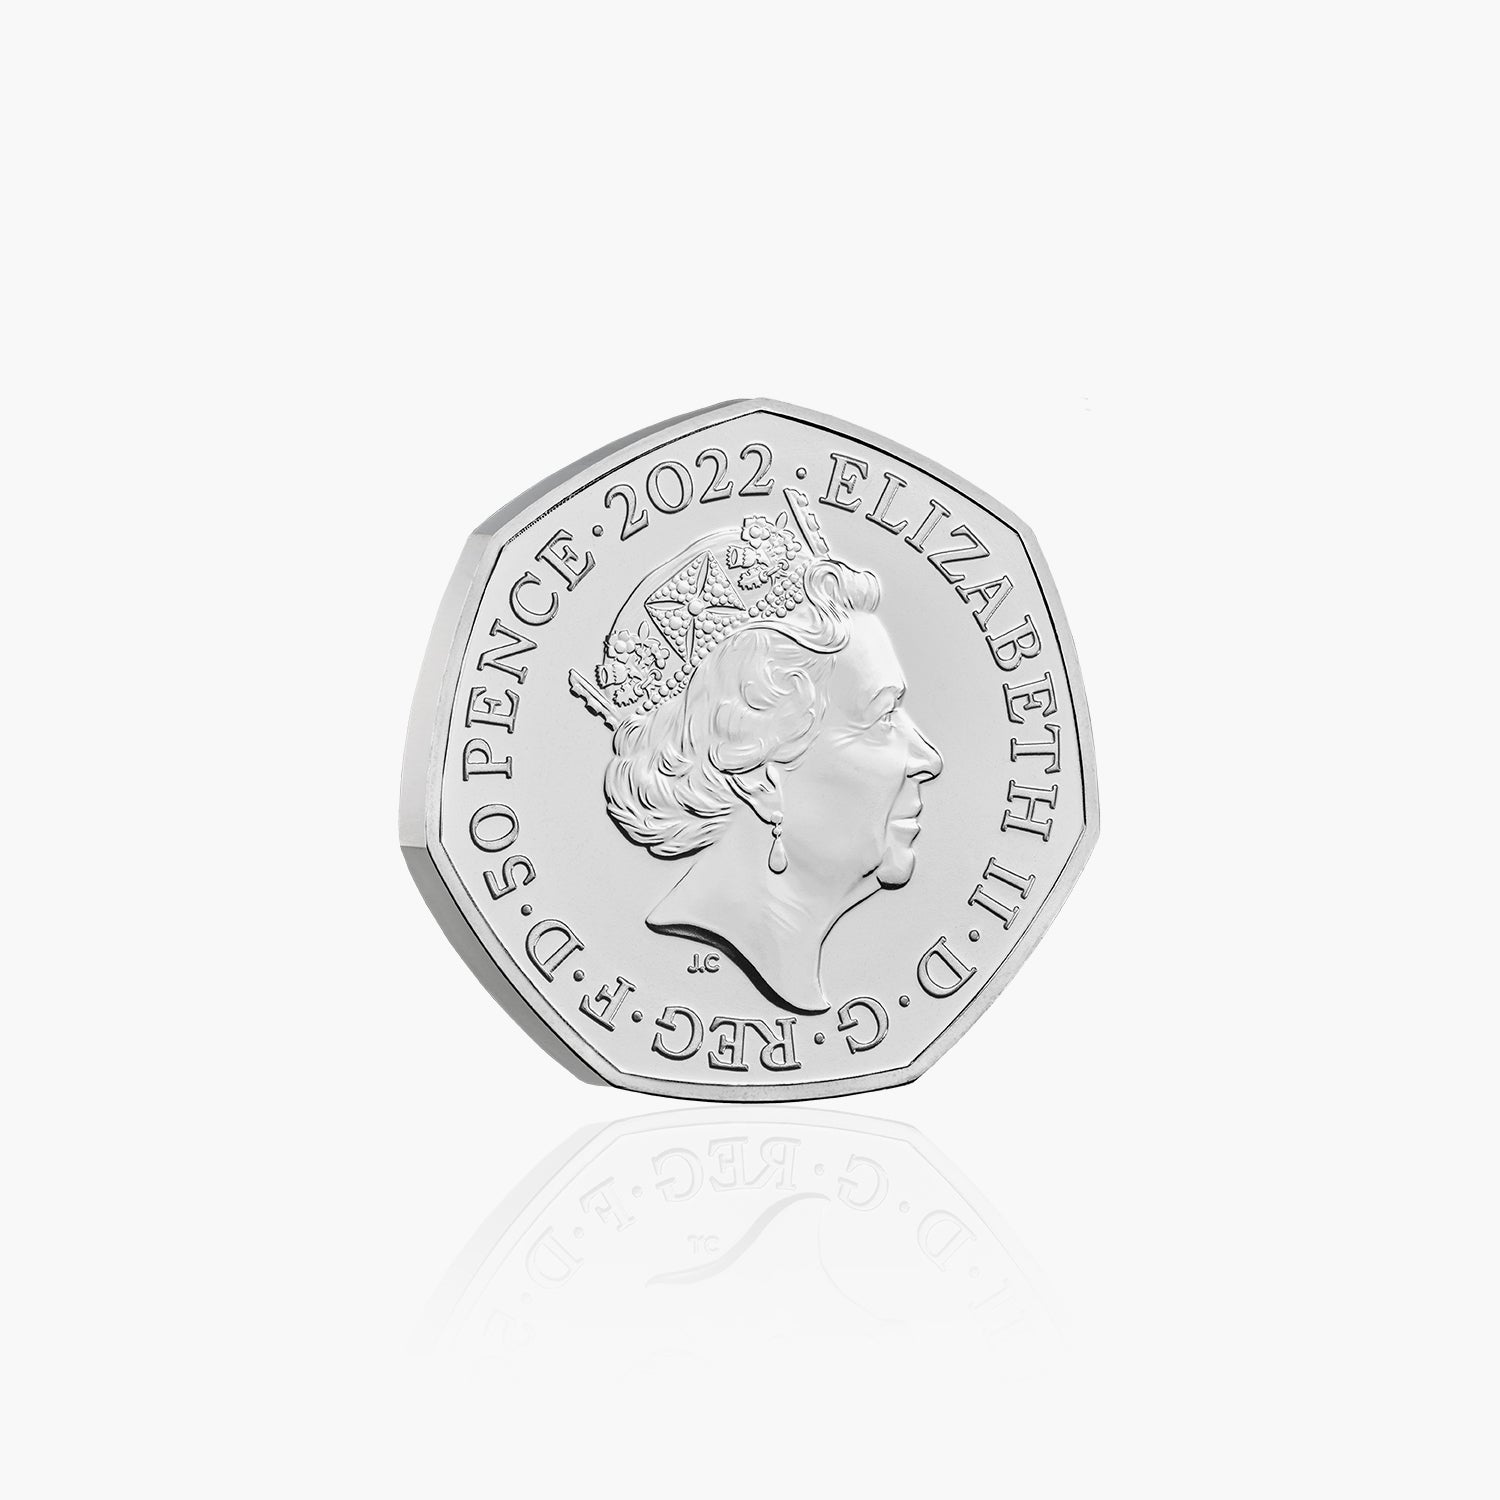 50 Years of Pride 2022 UK 50p Brilliant Uncirculated Coin